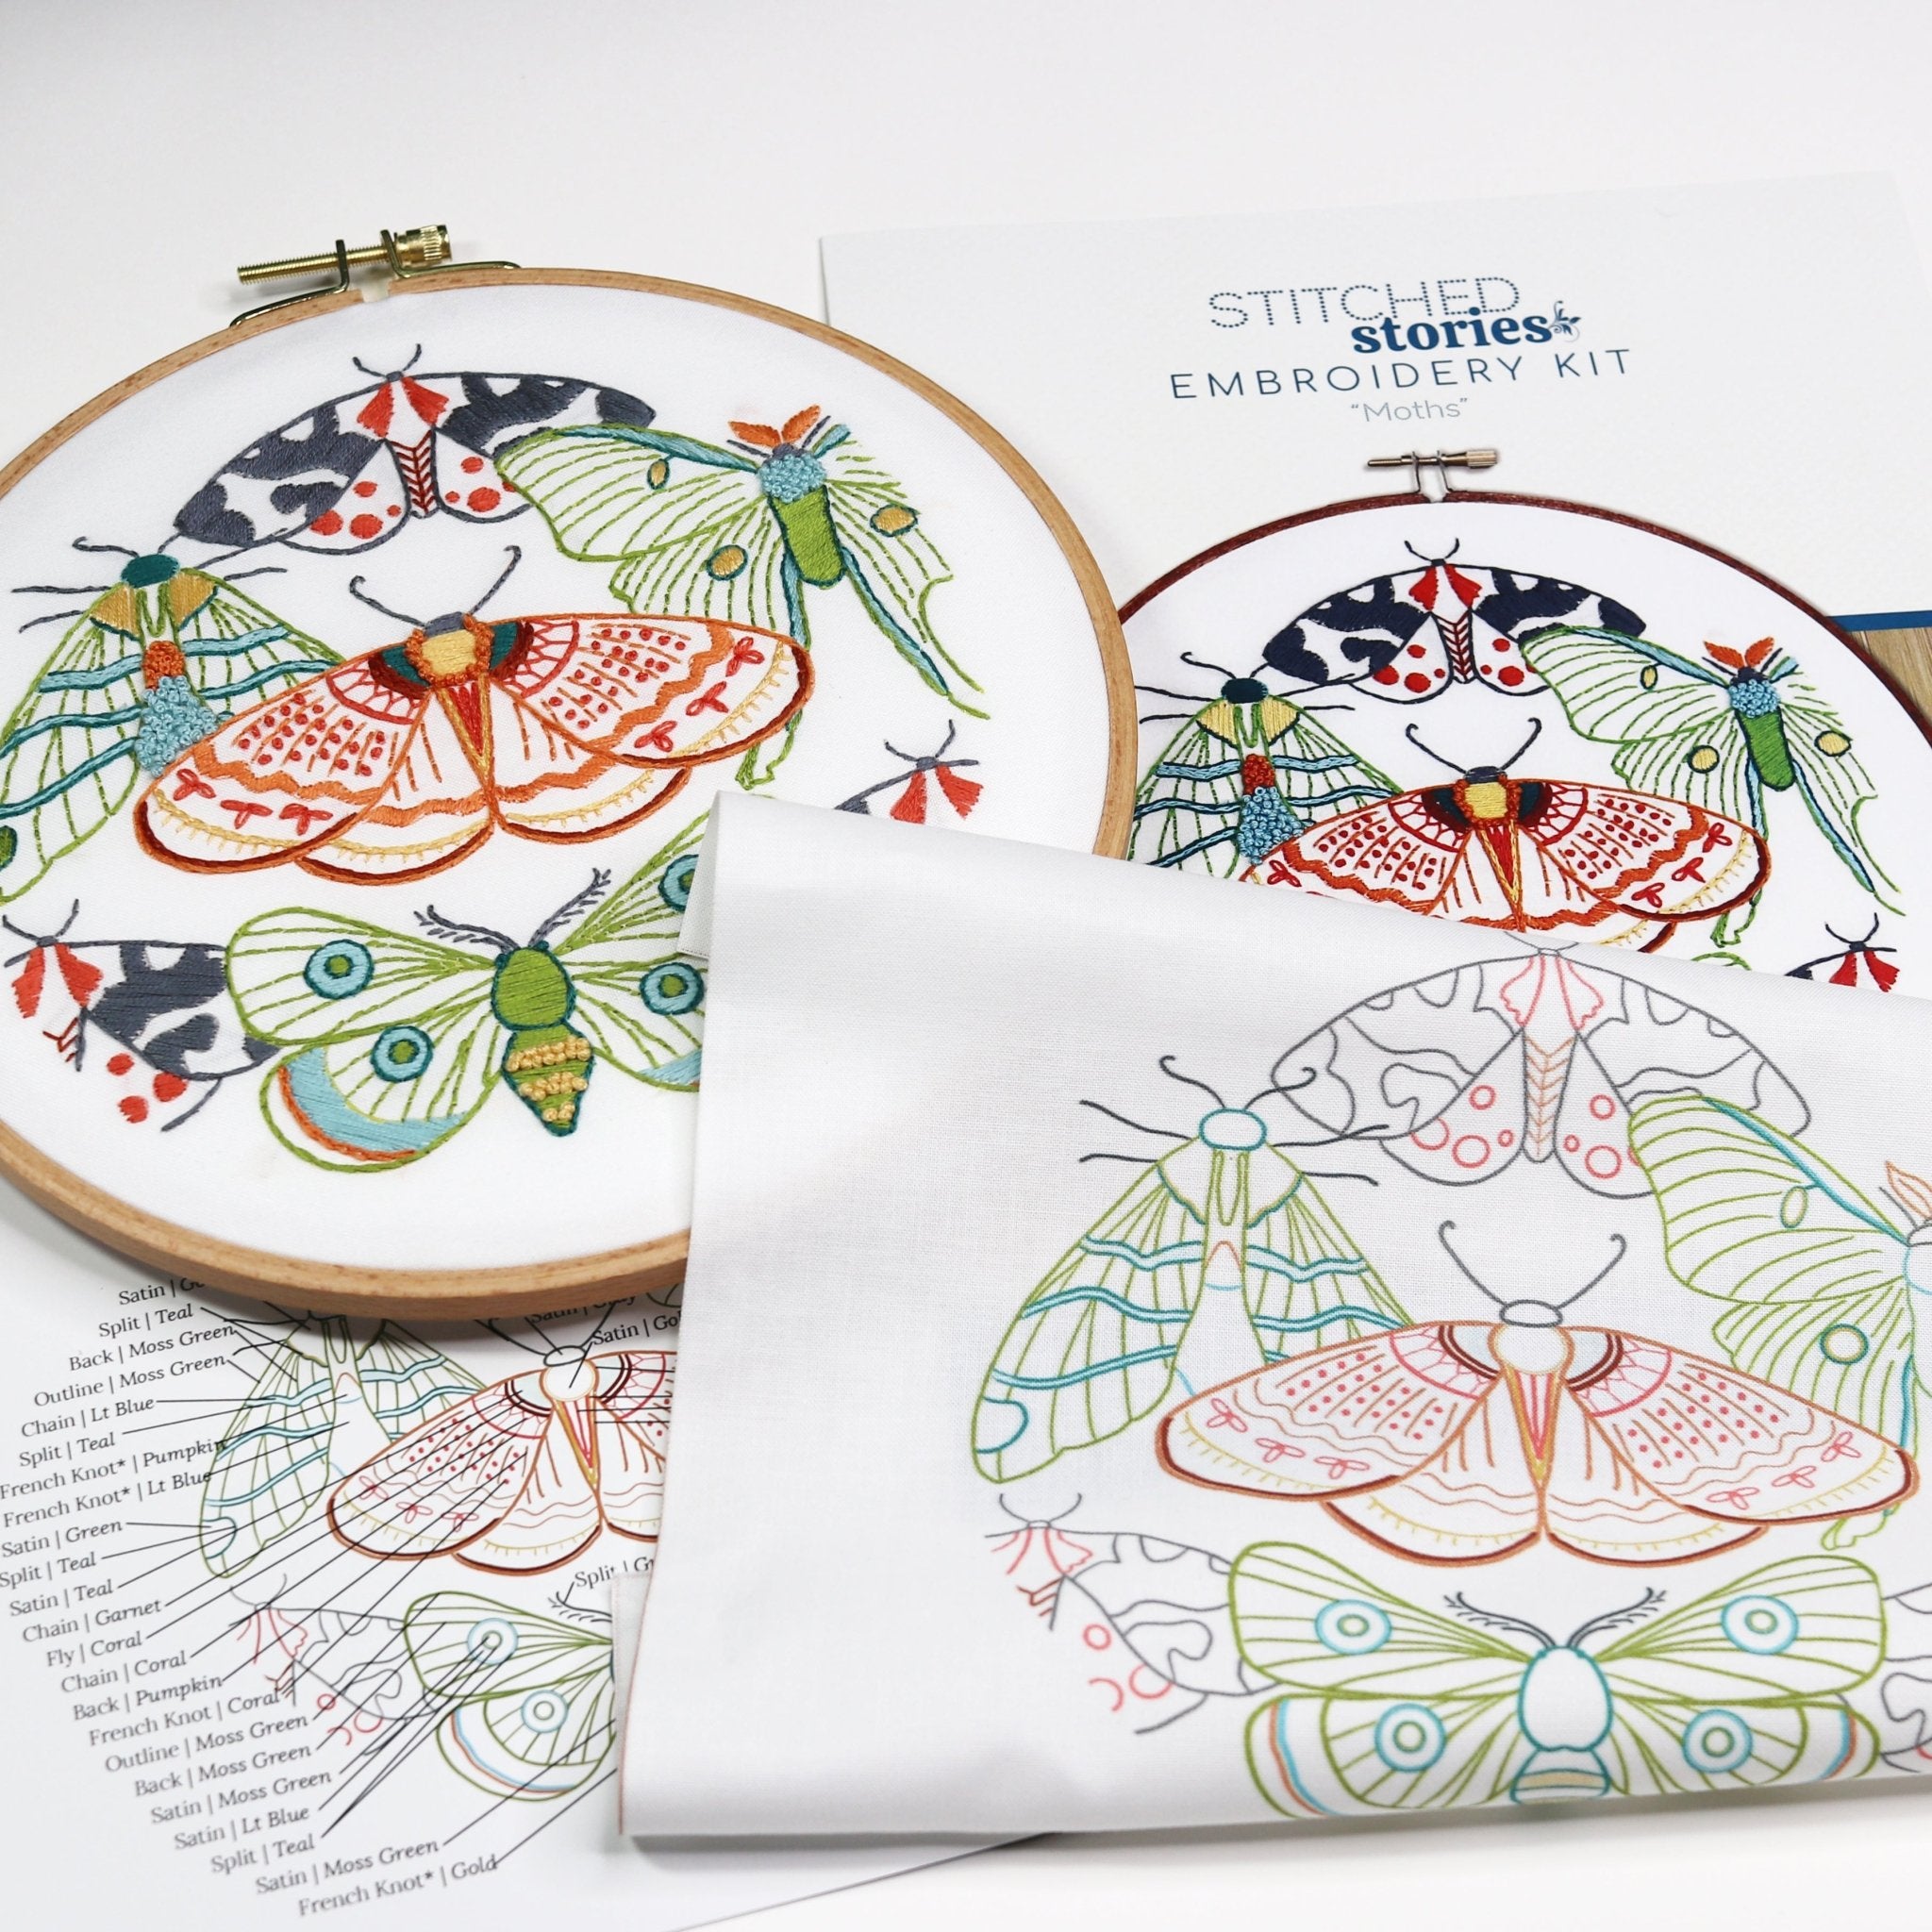 Embroidery Patterns - Pre Printed Fabric, Cotton, Stitched Stories